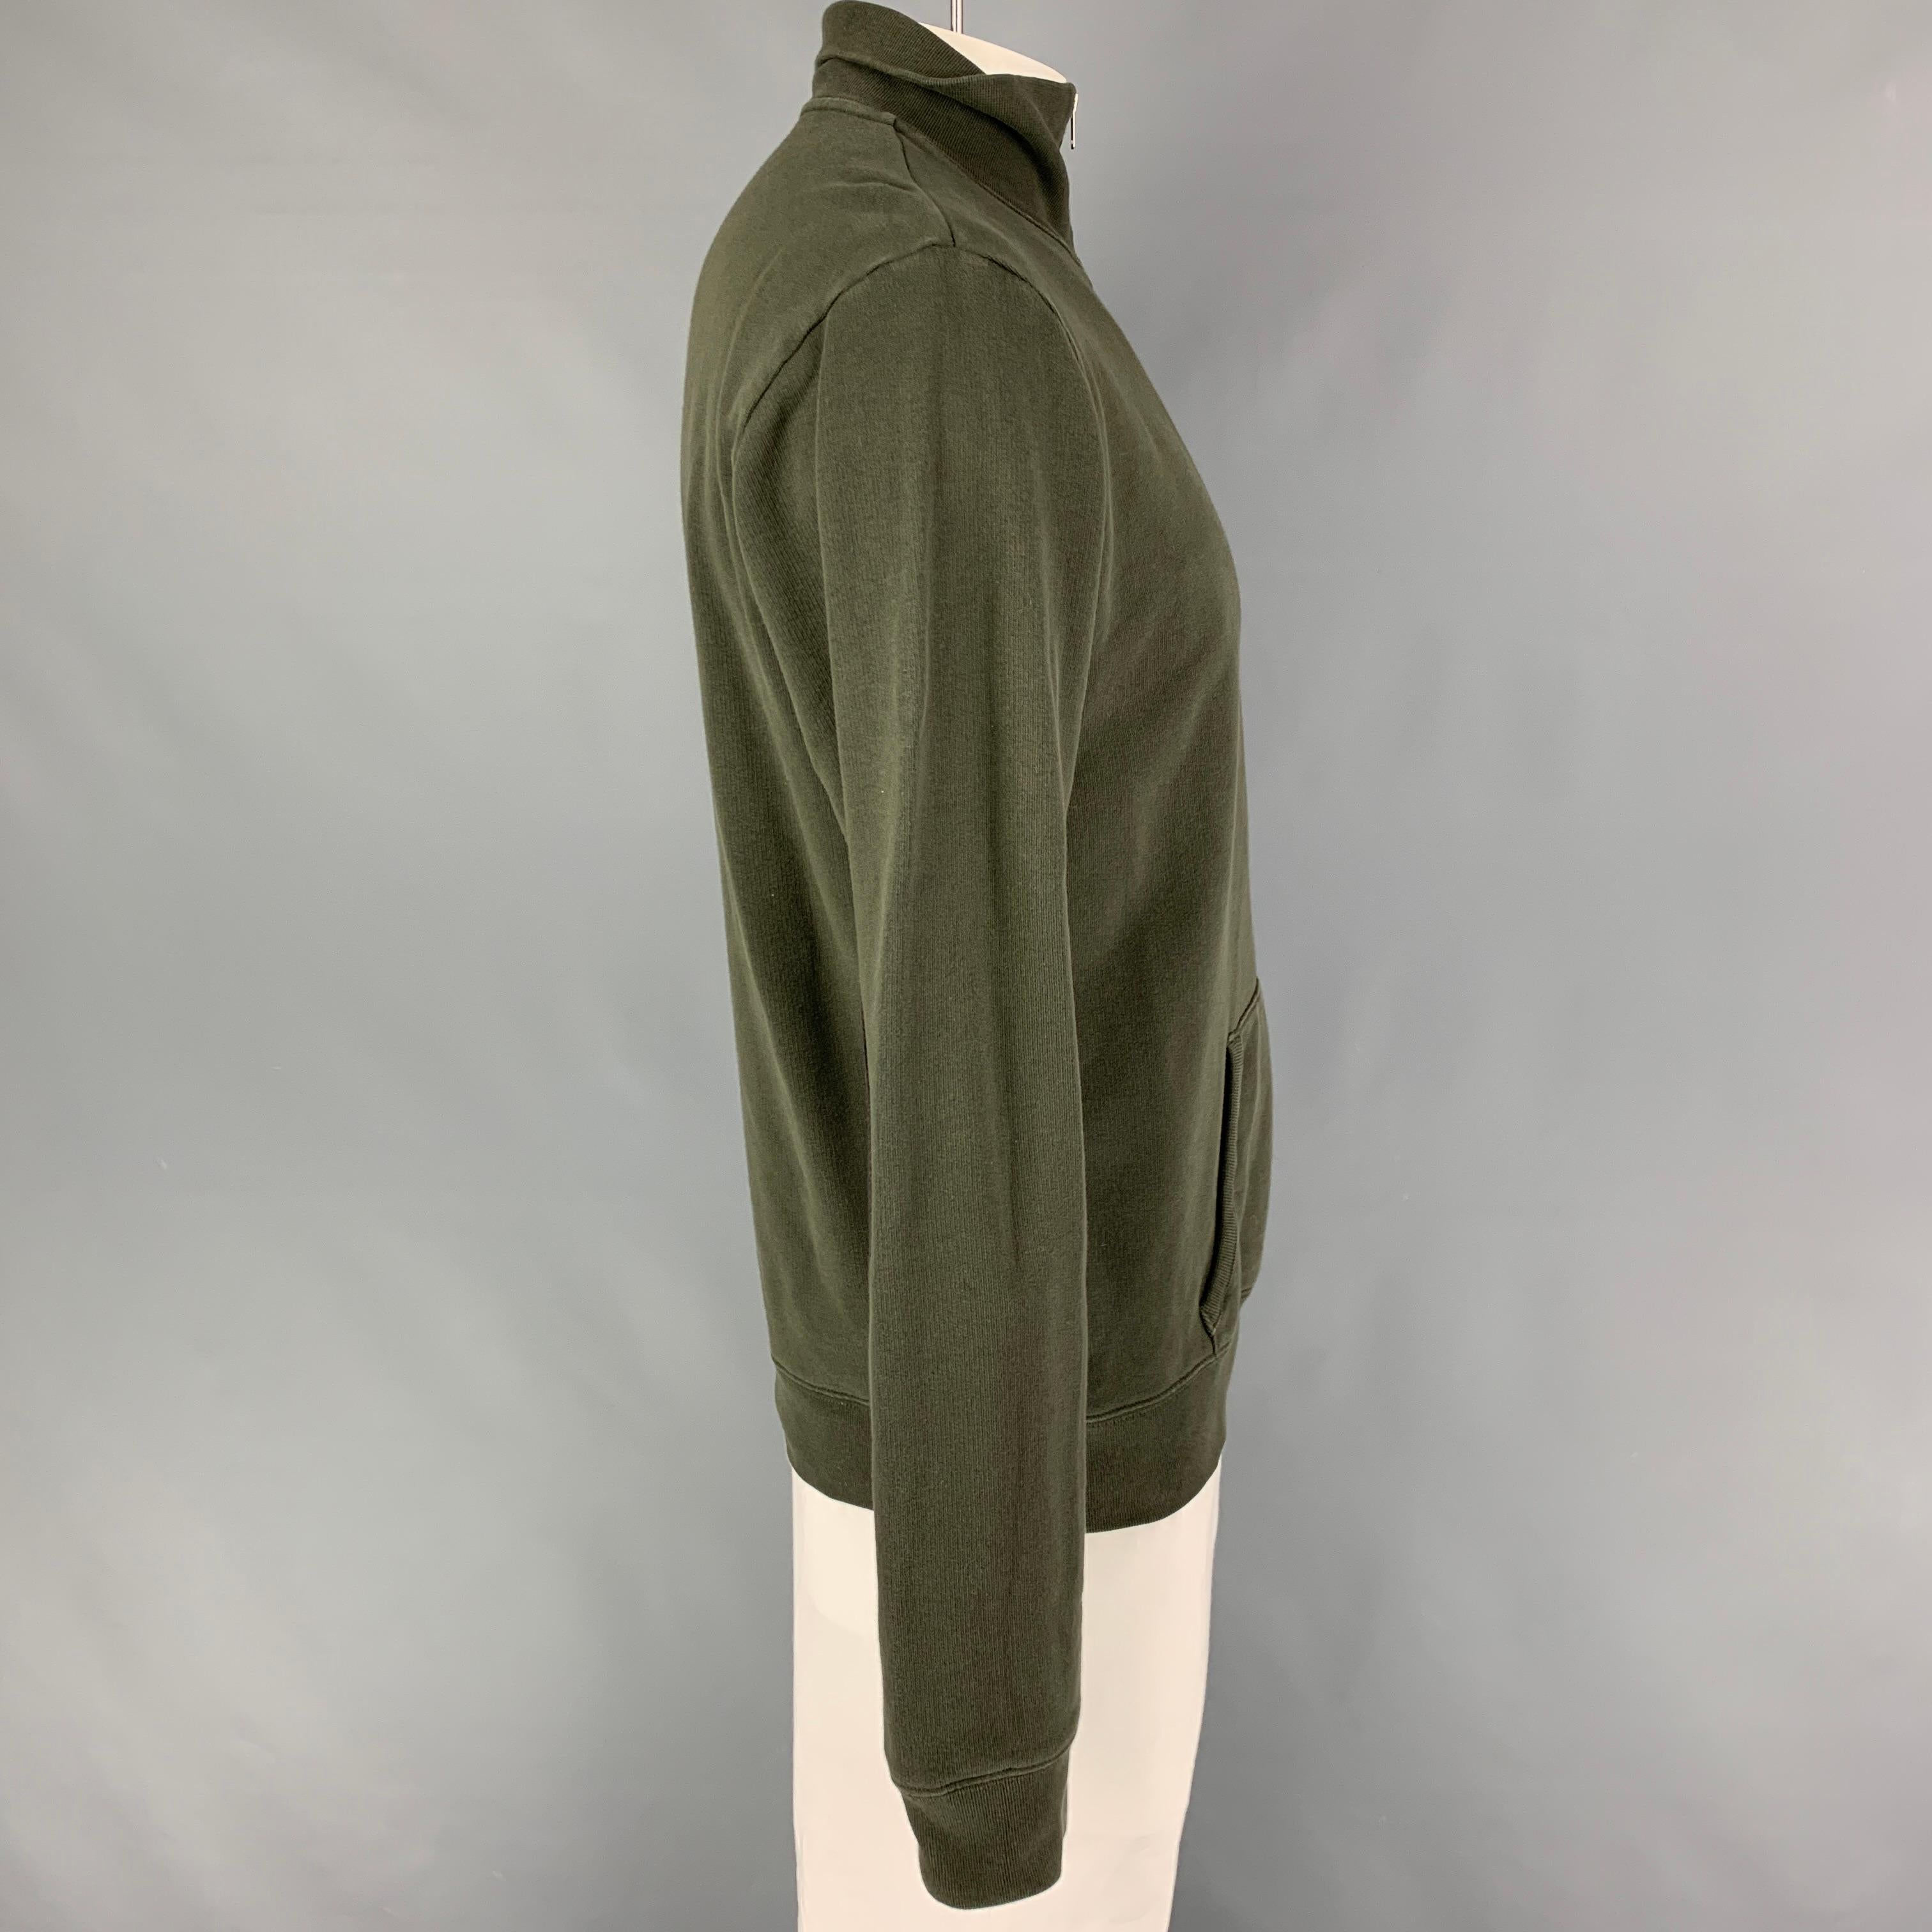 MAISON MARGIELA jacket comes in a olive cotton featuring a high collar, leather elbow patches, front pocket, and a half zip up closure. Made in Italy. 

Good Pre-Owned Condition. Moderate discoloration at front.
Marked: 52

Measurements:

Shoulder: